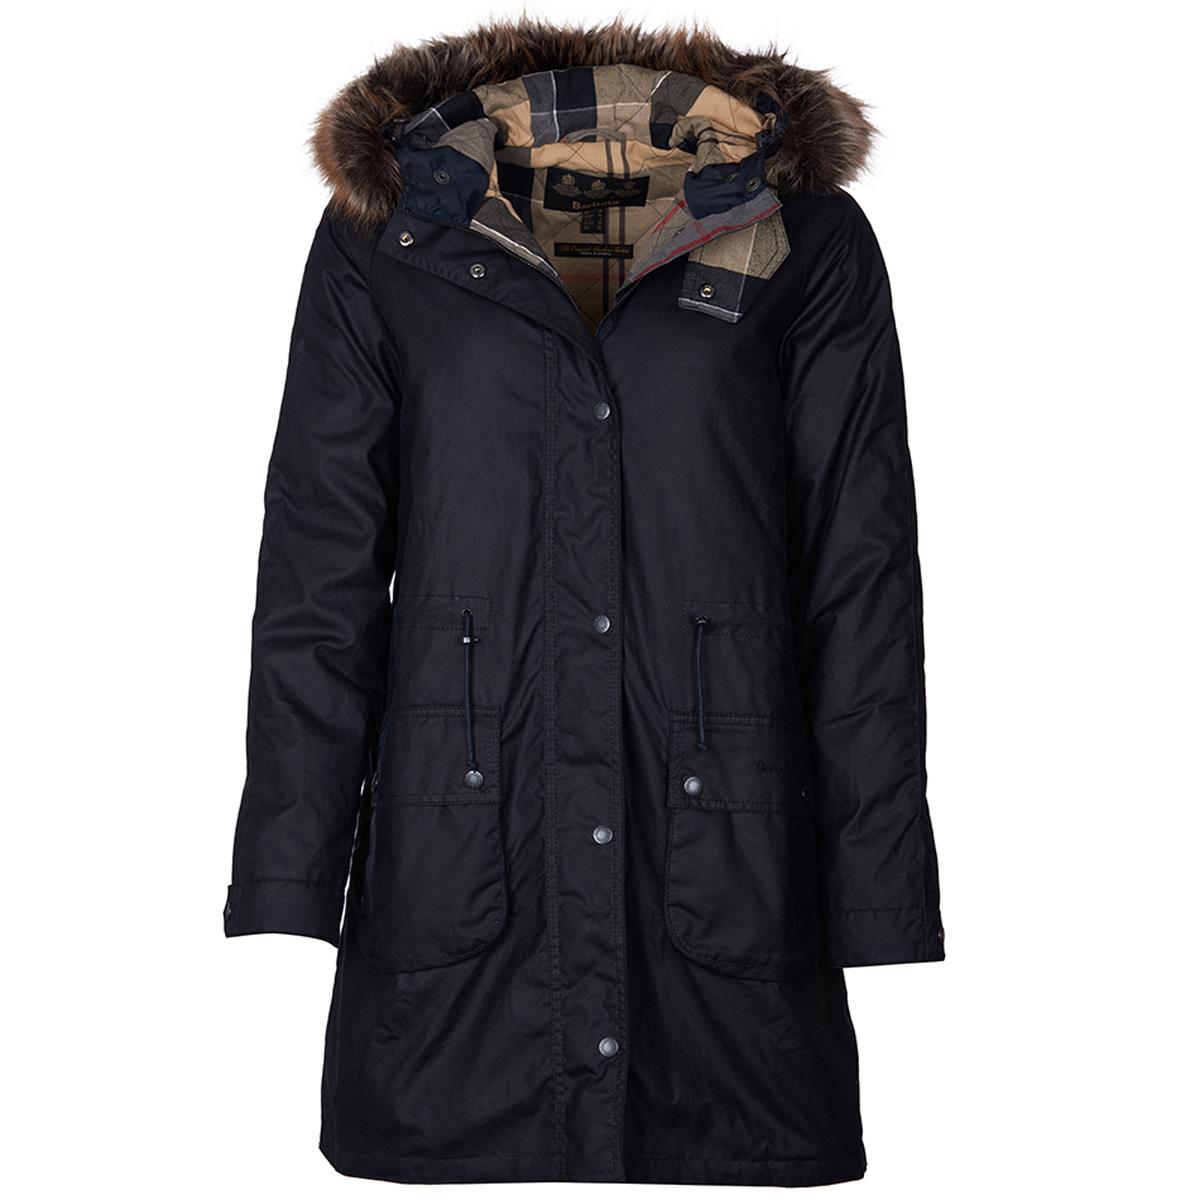 Barbour Womens Mull Wax Jacket Questions & Answers